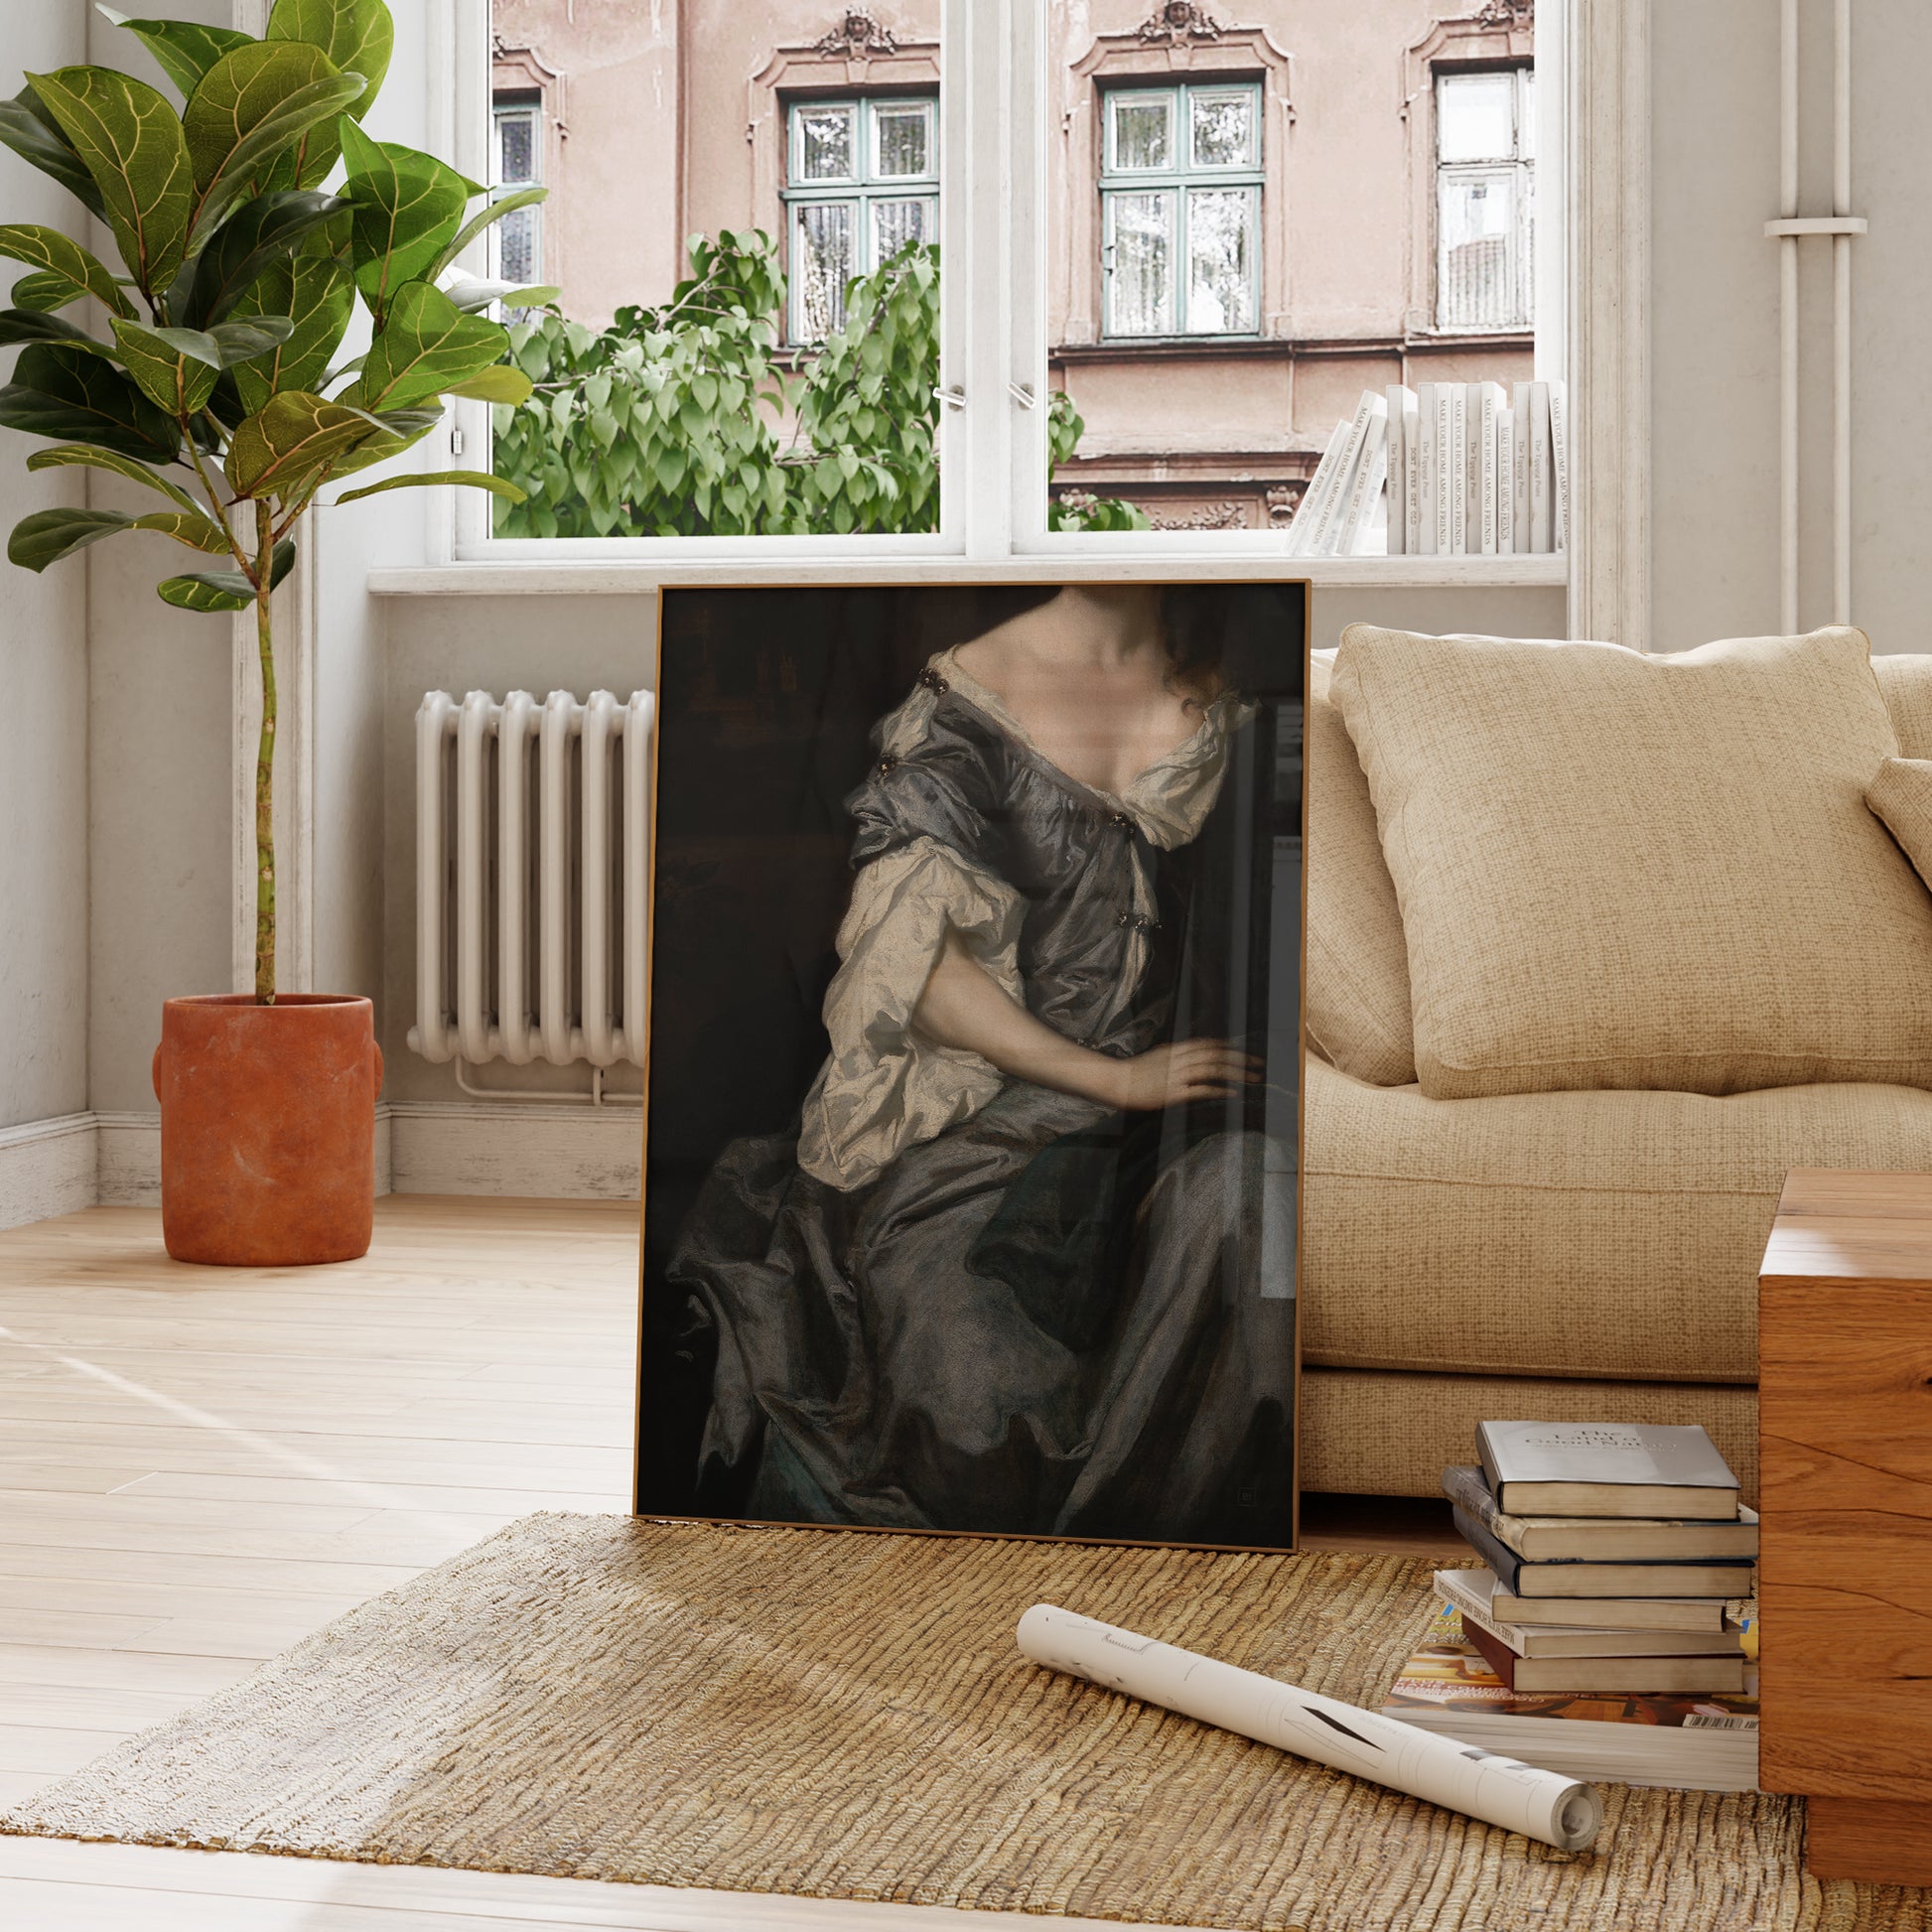 Be inspired by our altered Victorian Woman in Gray Satin Dress art print. This artwork was printed using the giclée process on archival acid-free paper and is presented in a french living room that captures its timeless beauty in every detail.